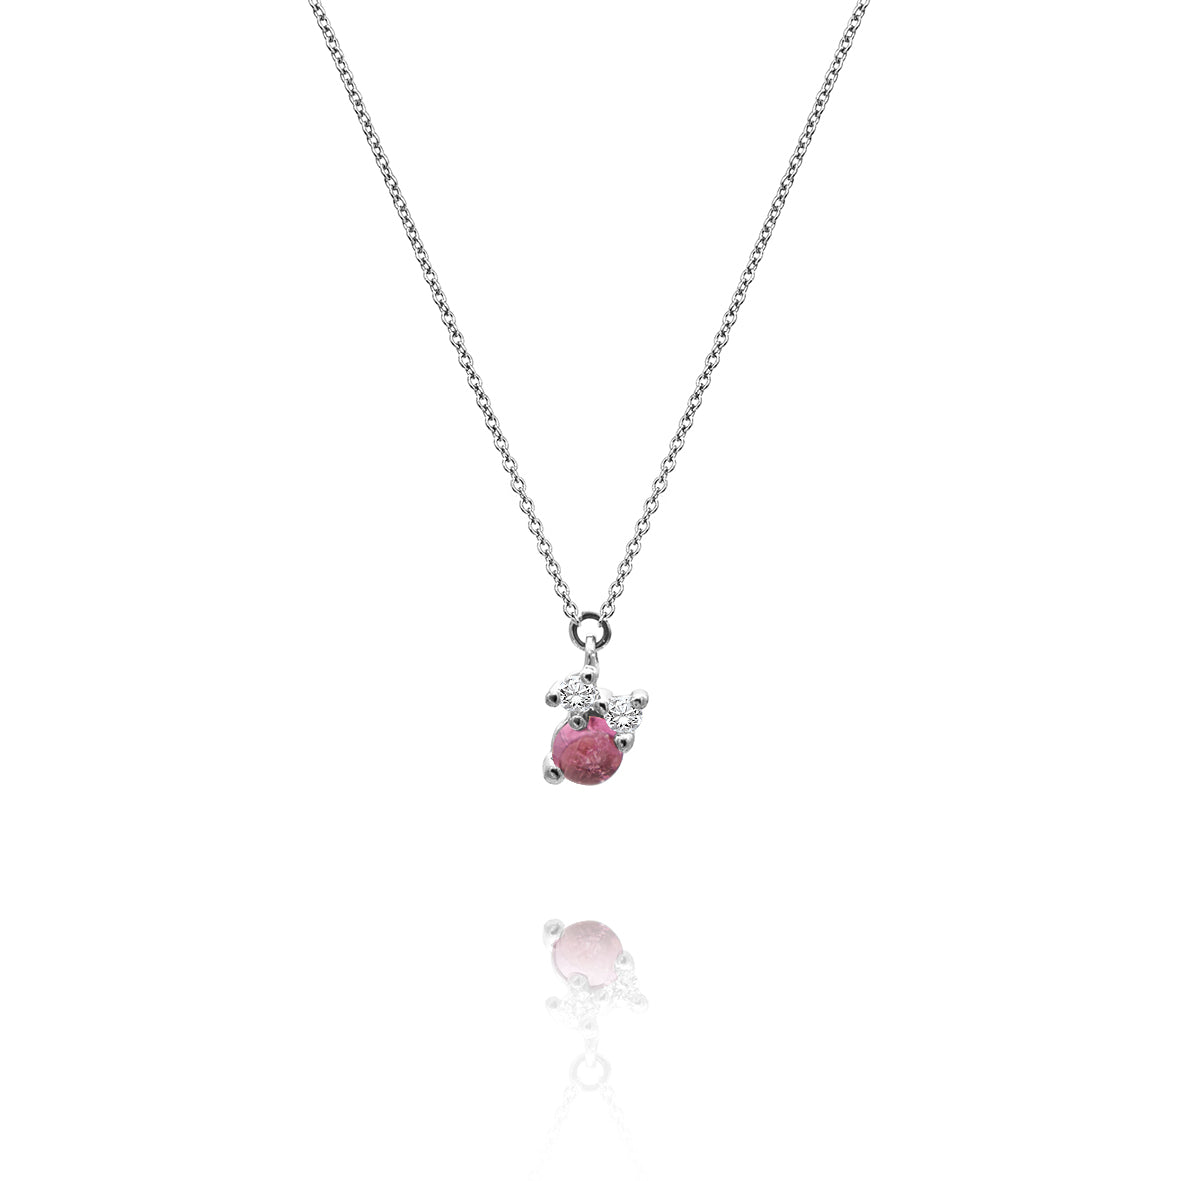 Stellini pendant "smal" in 585/- gold with pink tourmaline